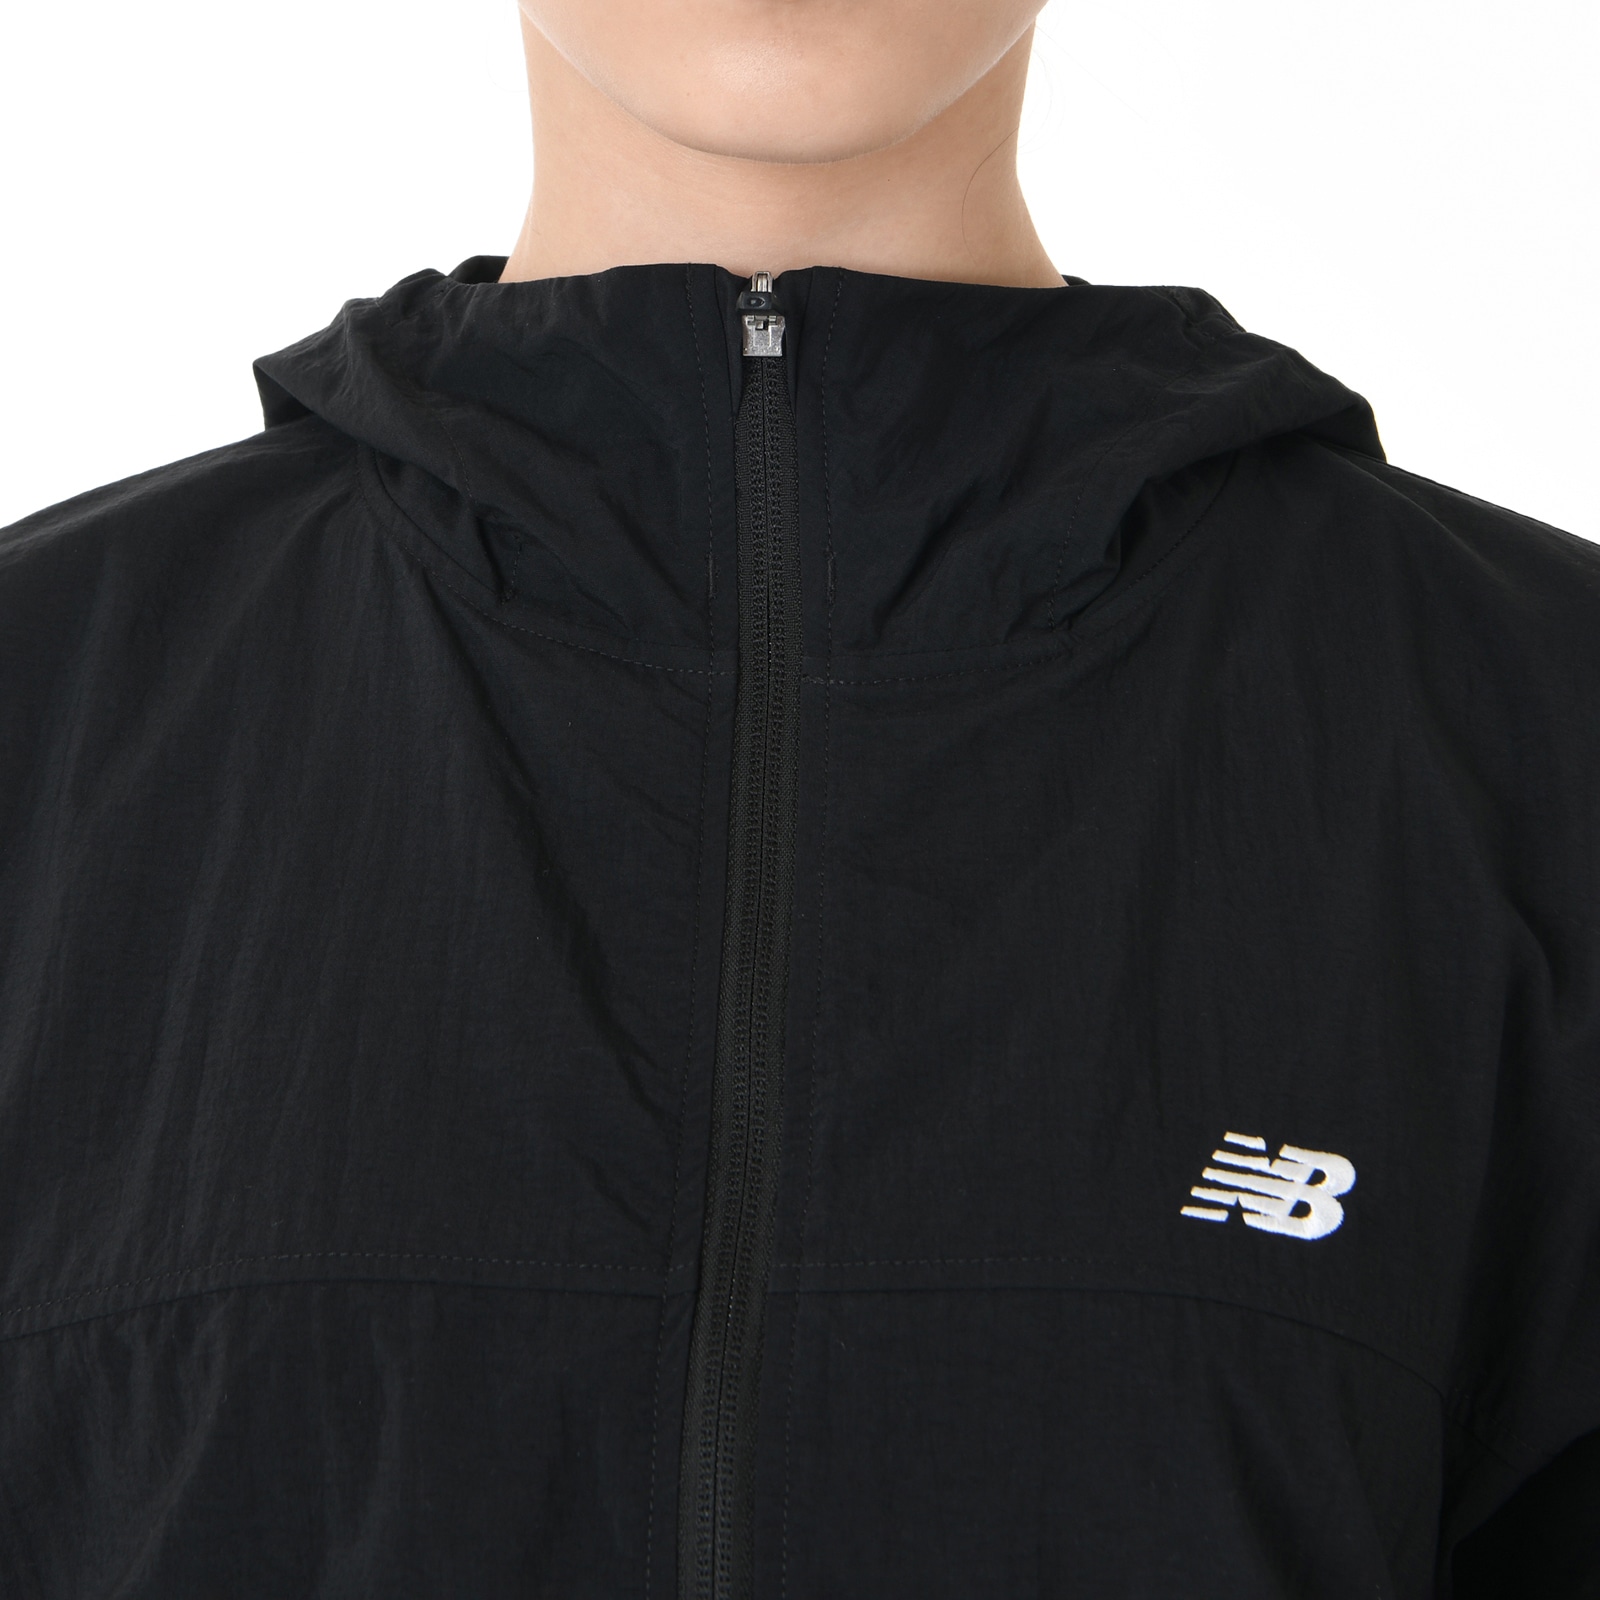 MFO Performance Woven Embroidered Logo Hooded Jacket